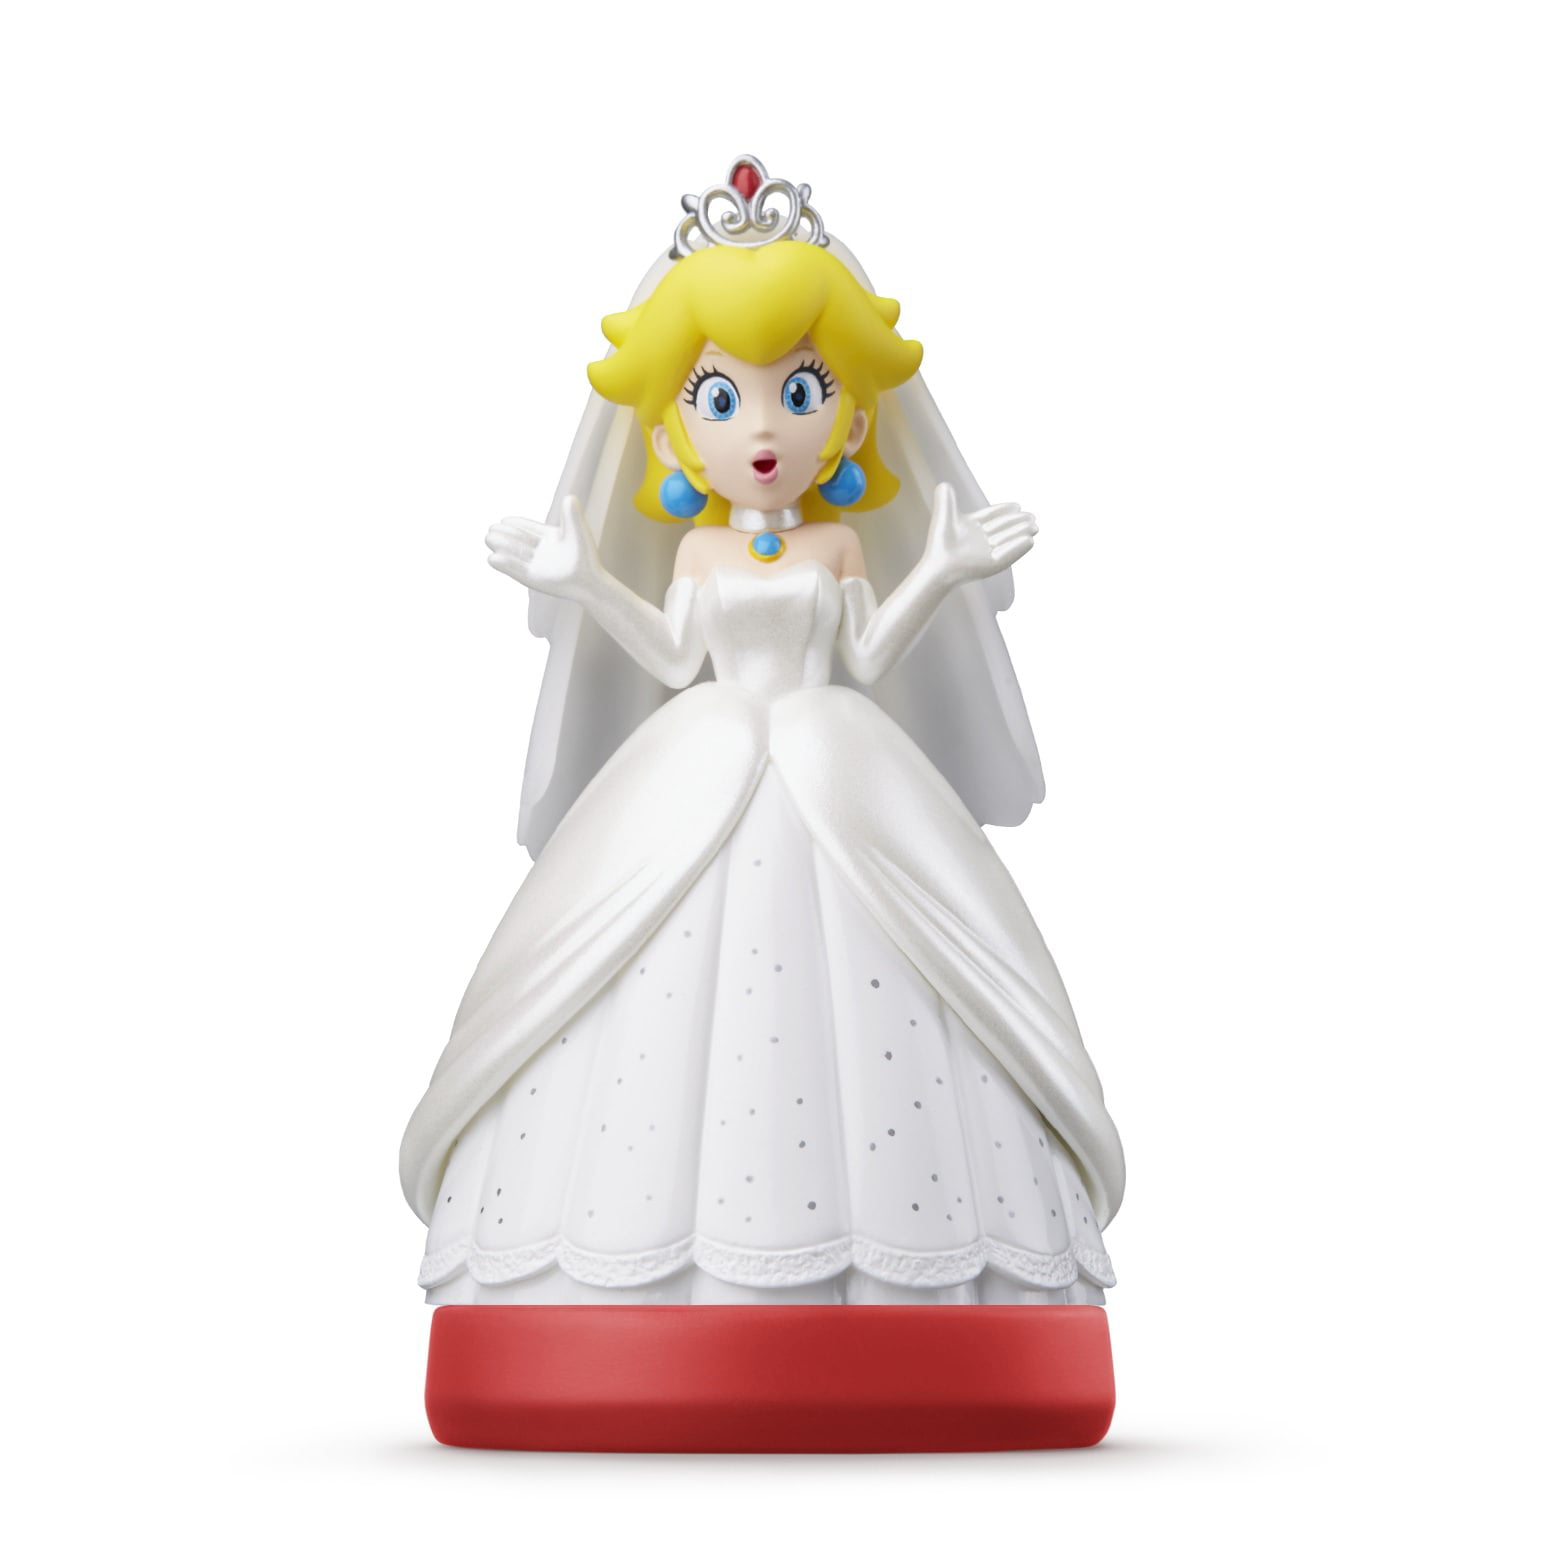 amiibo Super Mario Odyssey Series Figure (Koopa - Wedding Outfit) for Wii U,  New 3DS, New 3DS LL / XL, SW